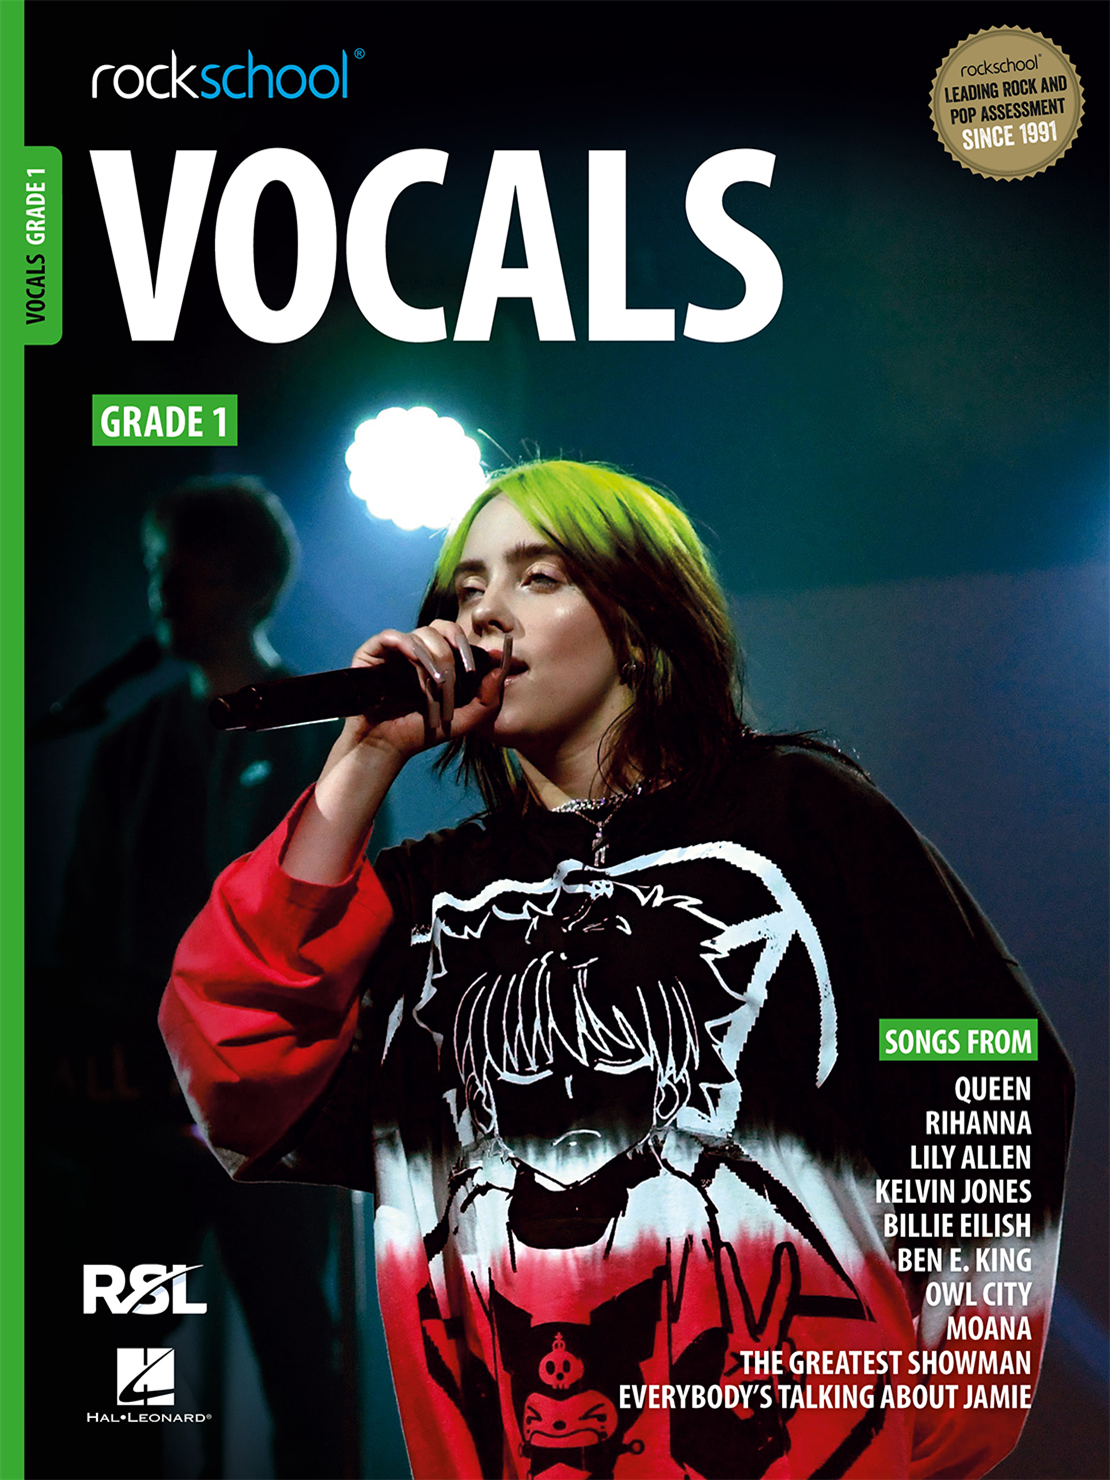 Rockschool Vocals Grade 2 Female Audio Download Learn to Play MUSIC BOOK/AUDIO 